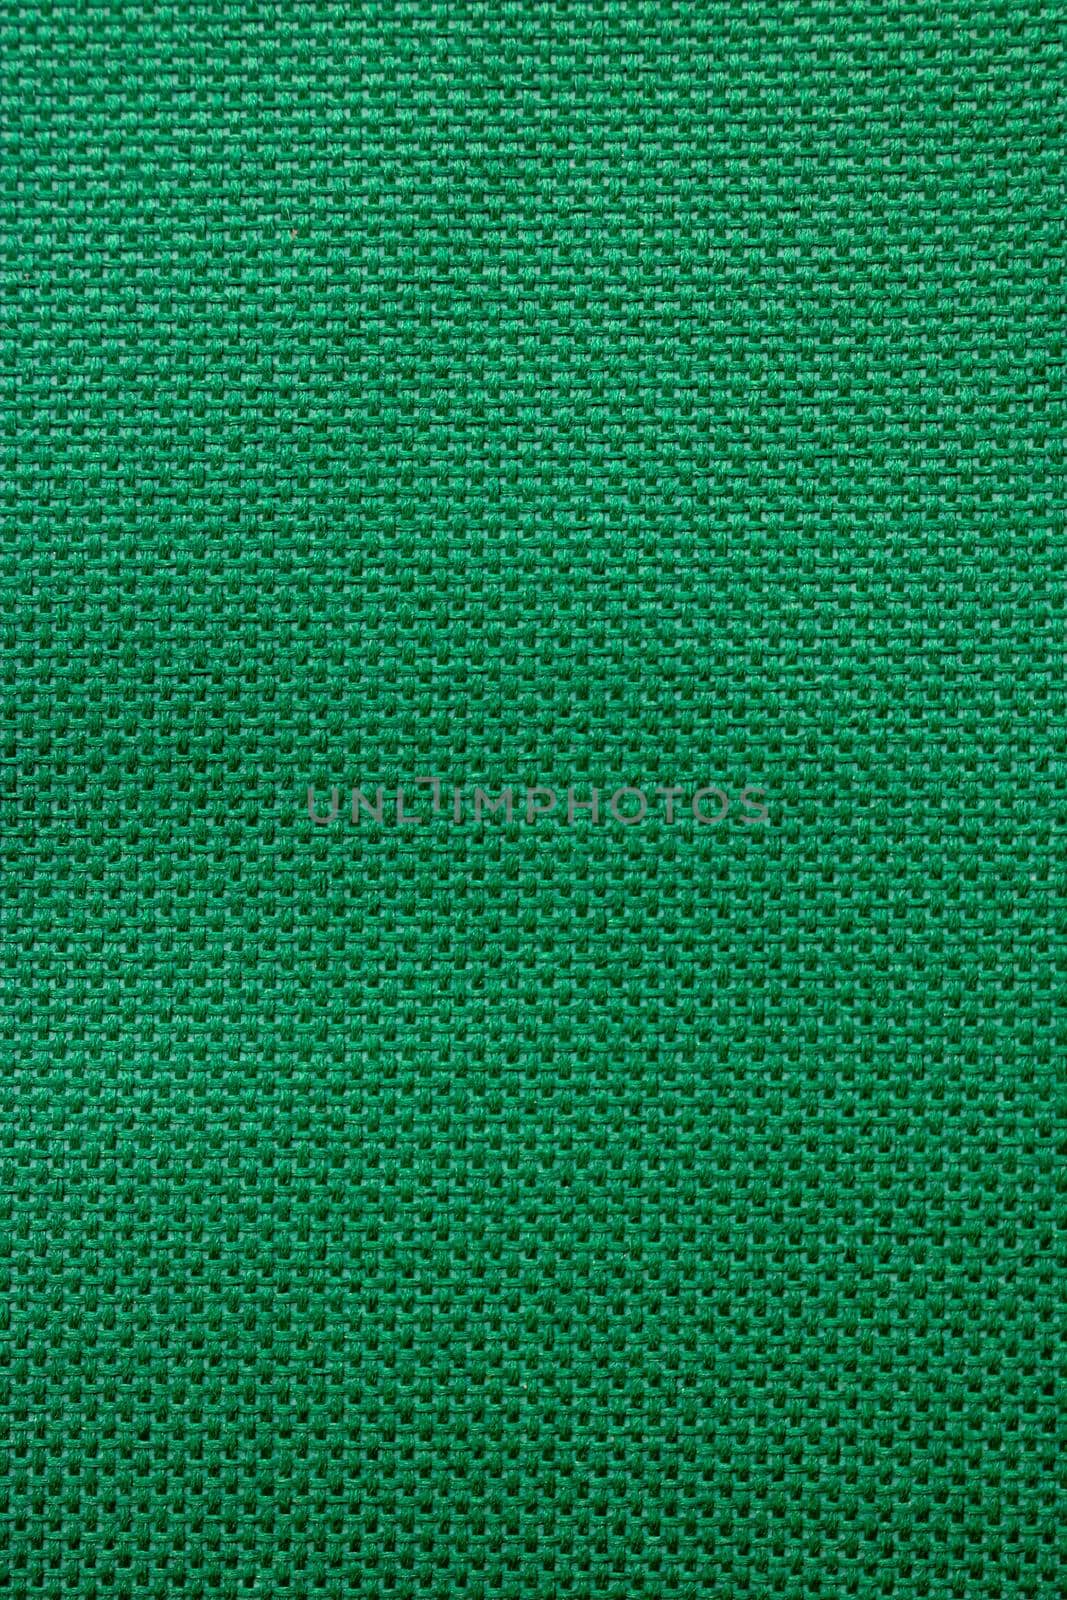 Dark green rough textile material. background texture close-up by lapushka62